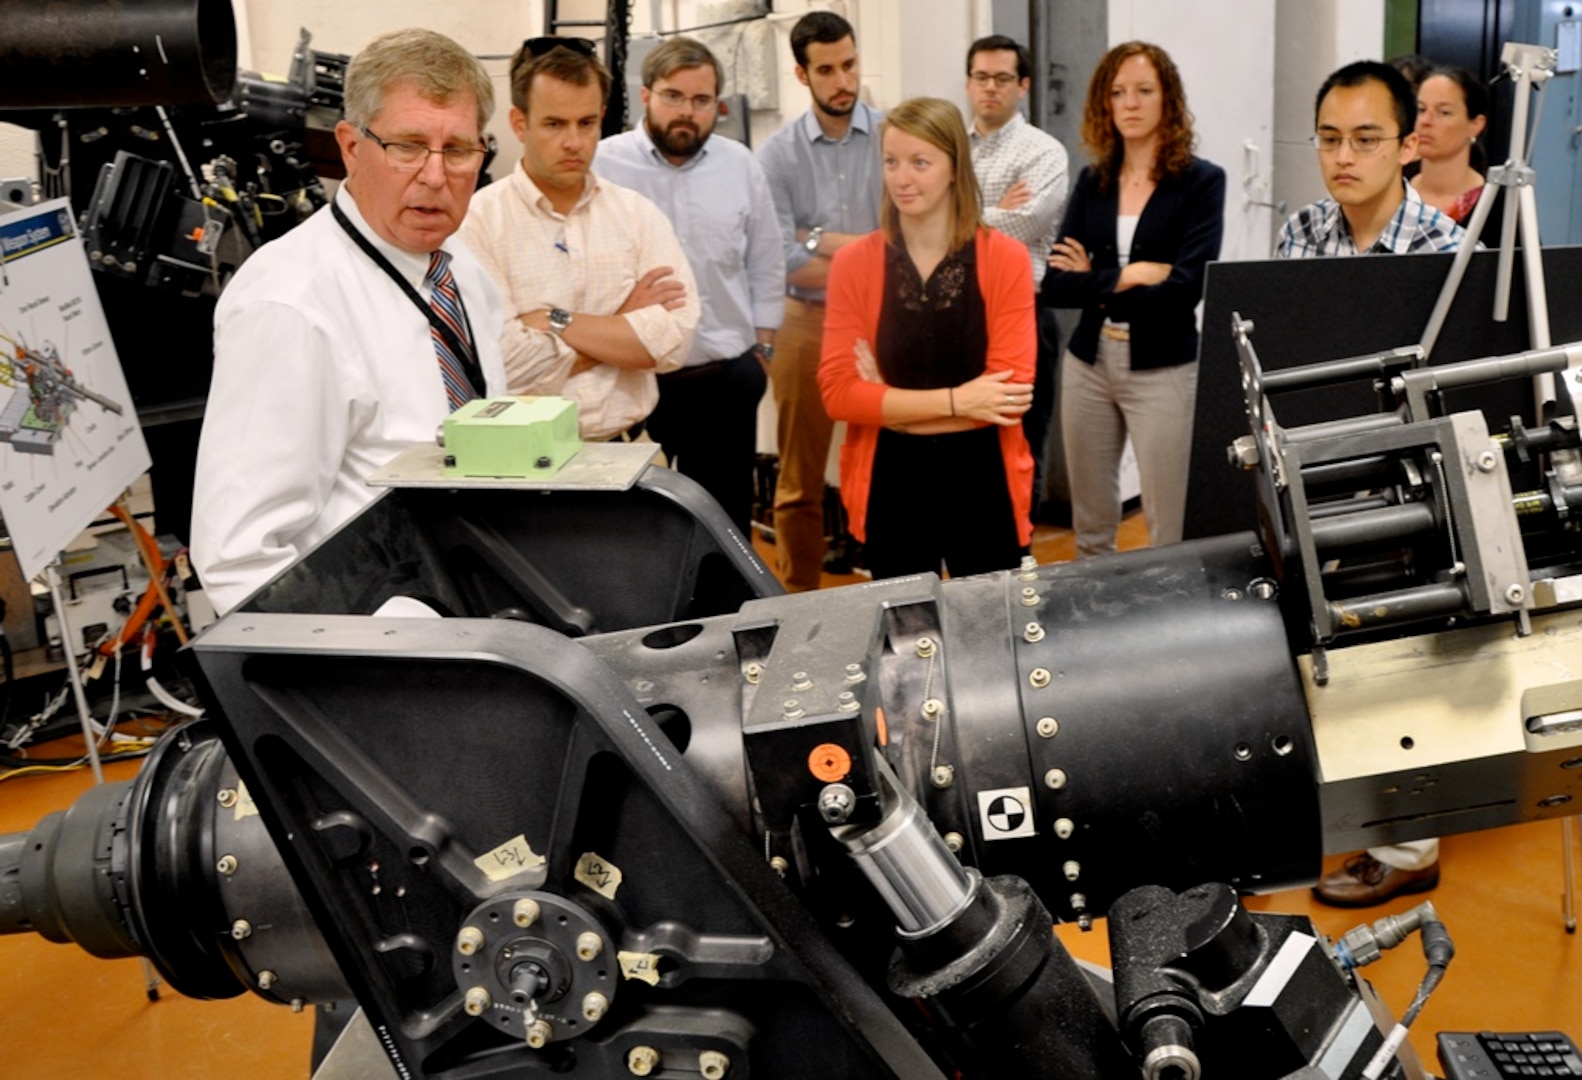 DAHLGREN, Va. - Naval Surface Warfare Center Dahlgren Division (NSWCDD) senior engineer Ralph Stewart briefs congressional staffers on the 105 MM gun weapon system during the delegation's tour of the NSWCDD Battle Management System and Laboratory, July 29. The staffers - representing congressmen and women from Rhode Island, California, Alabama, Virginia, Hawaii, Indiana and Oklahoma - also received tours and briefings on the electromagnetic railgun, directed energy, virtualization, cybersecurity, and combined integrated air and missile defense-antisubmarine warfare. NSWCDD is a premier research and development center that serves as a specialty site for weapon system integration. The command's unique ability to rapidly introduce new technology into complex warfighting systems is based on its longstanding competencies in science and technology, research and development, and test and evaluation.